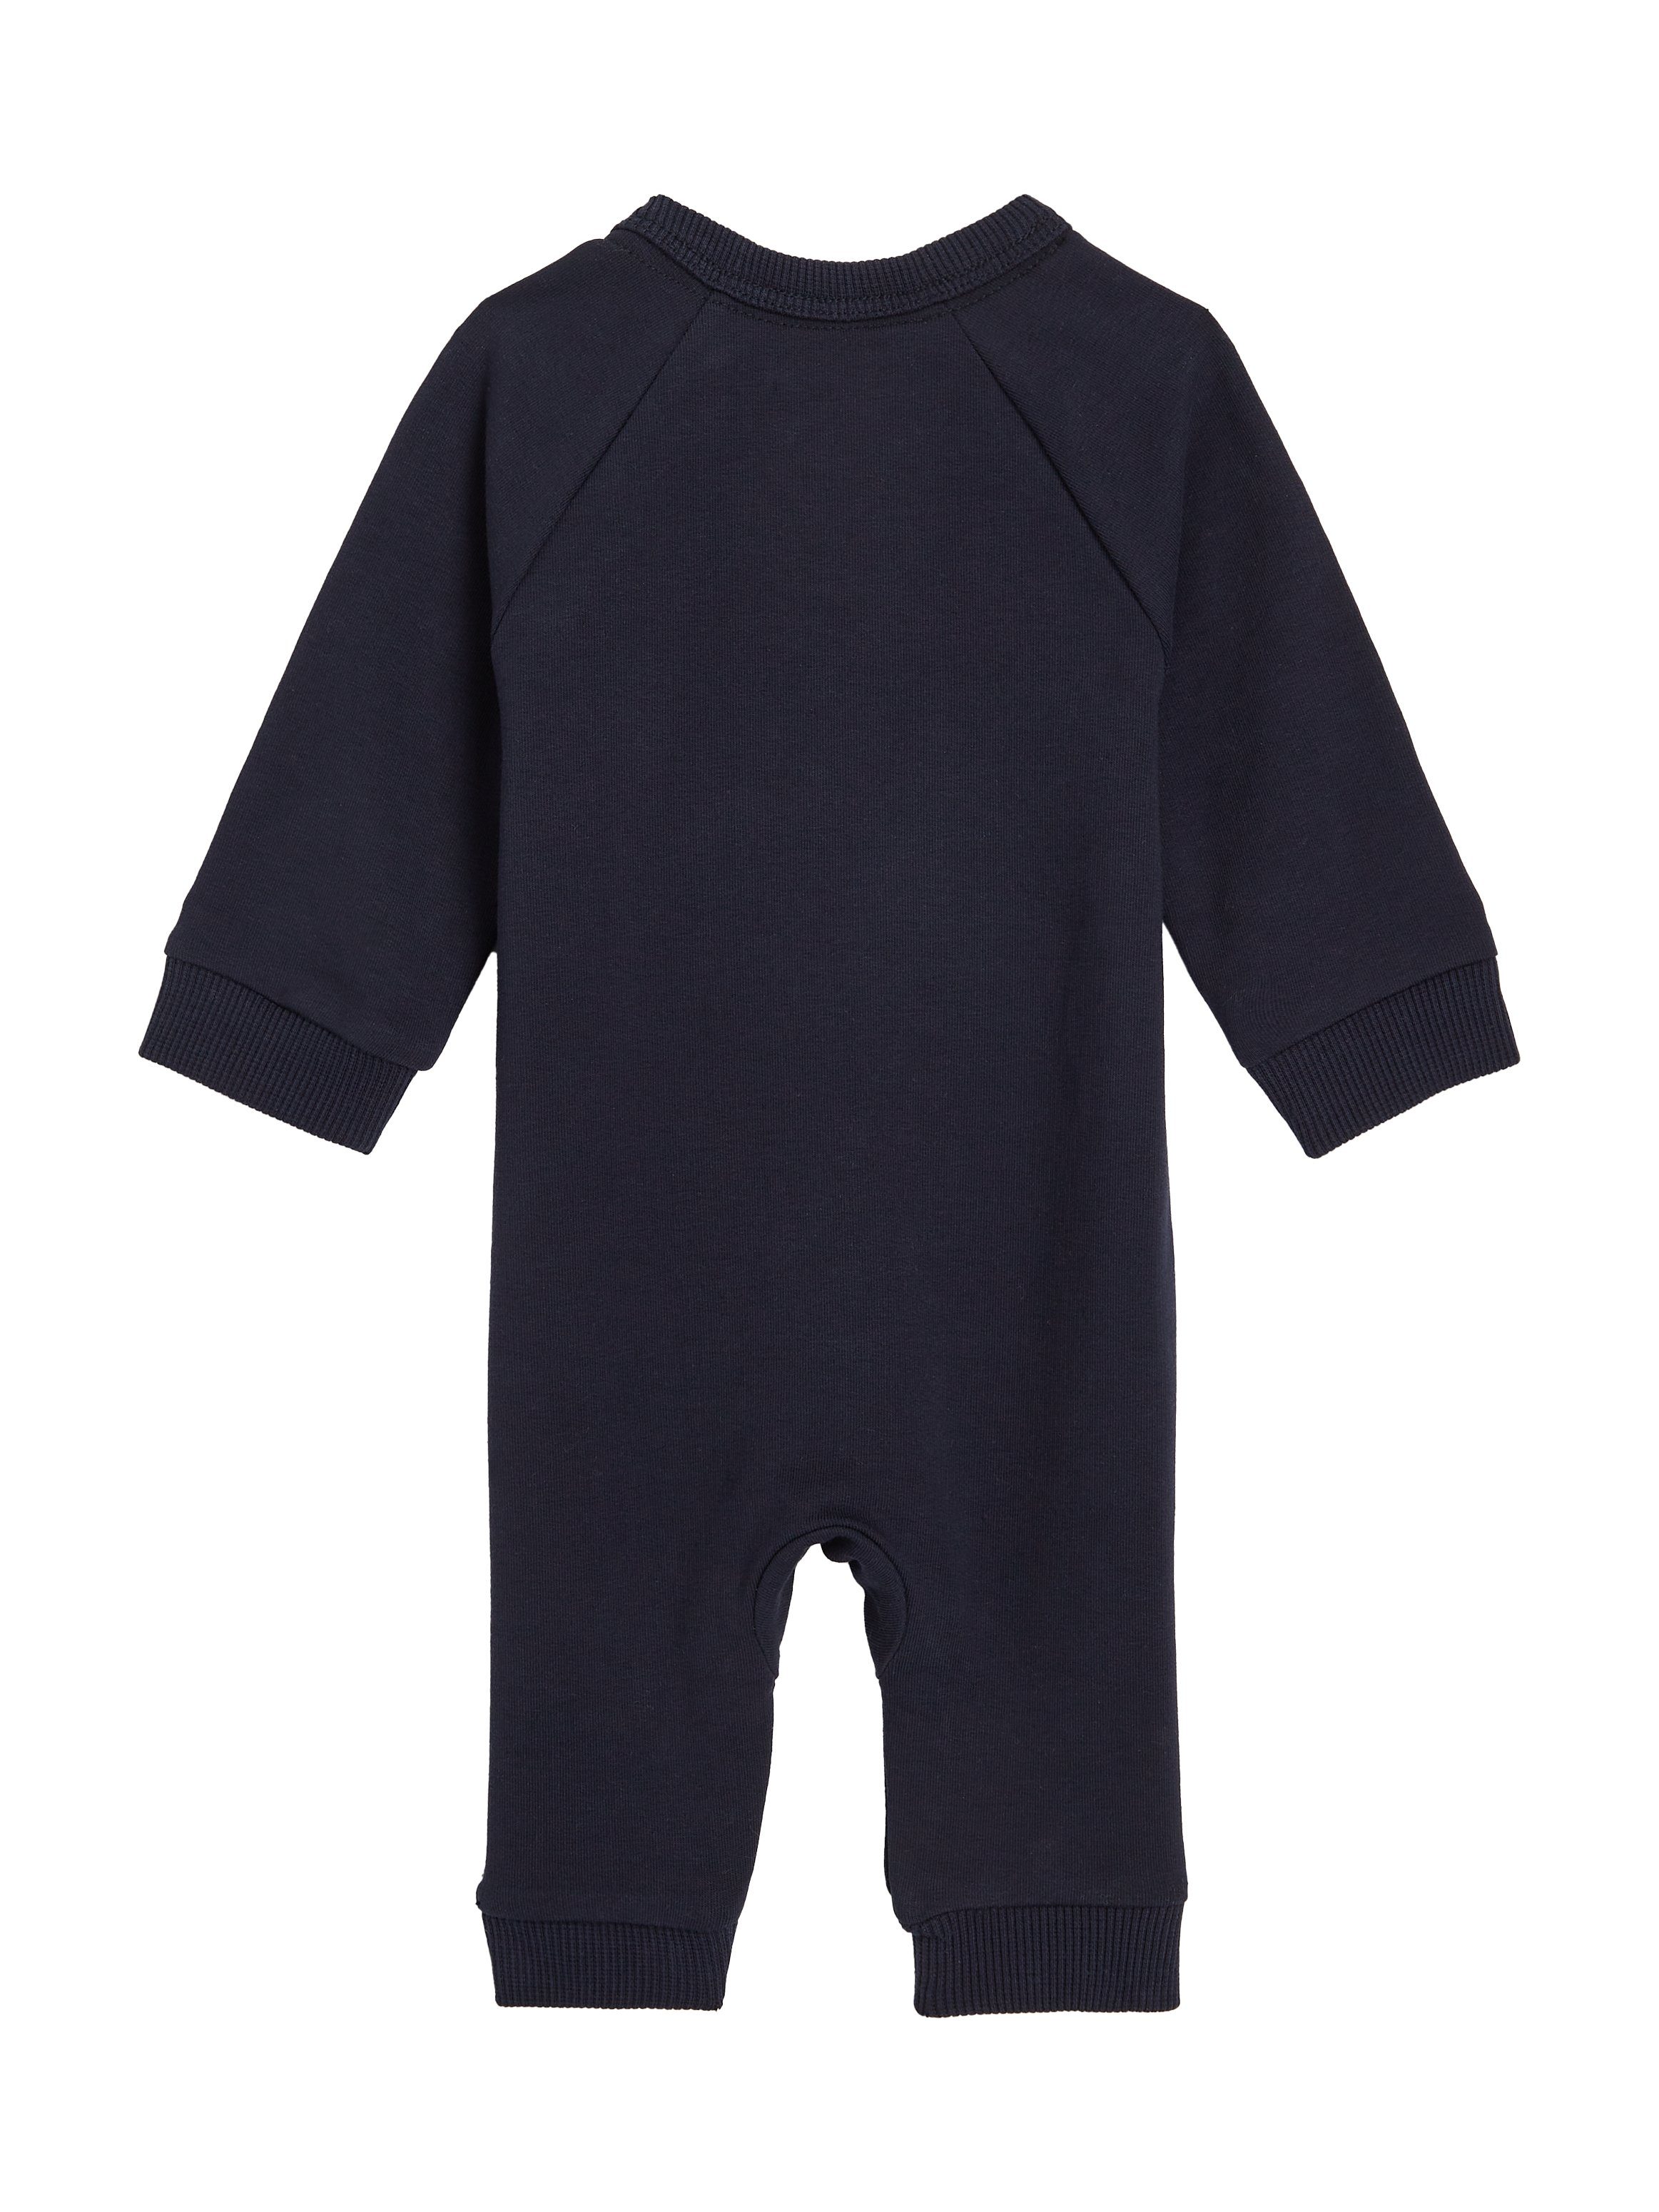 Hilfiger TH BABY COVERALL LOGO Tommy Overall